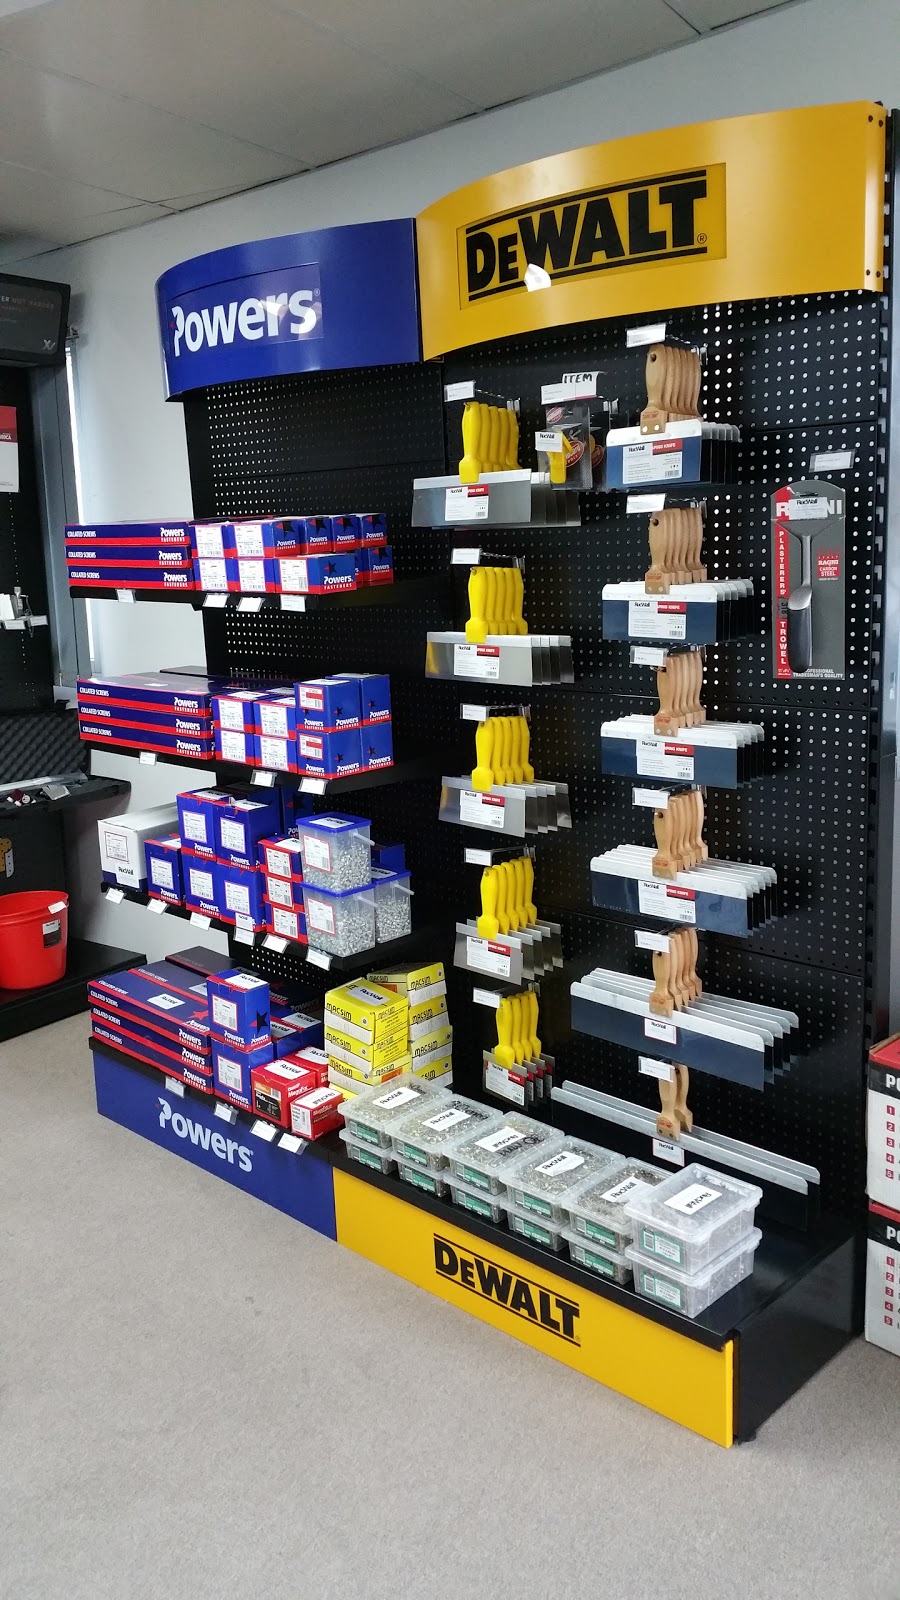 RocWall | store | 4/10-12 Carsten Rd, Gepps Cross SA 5094, Australia | 0883498102 OR +61 8 8349 8102